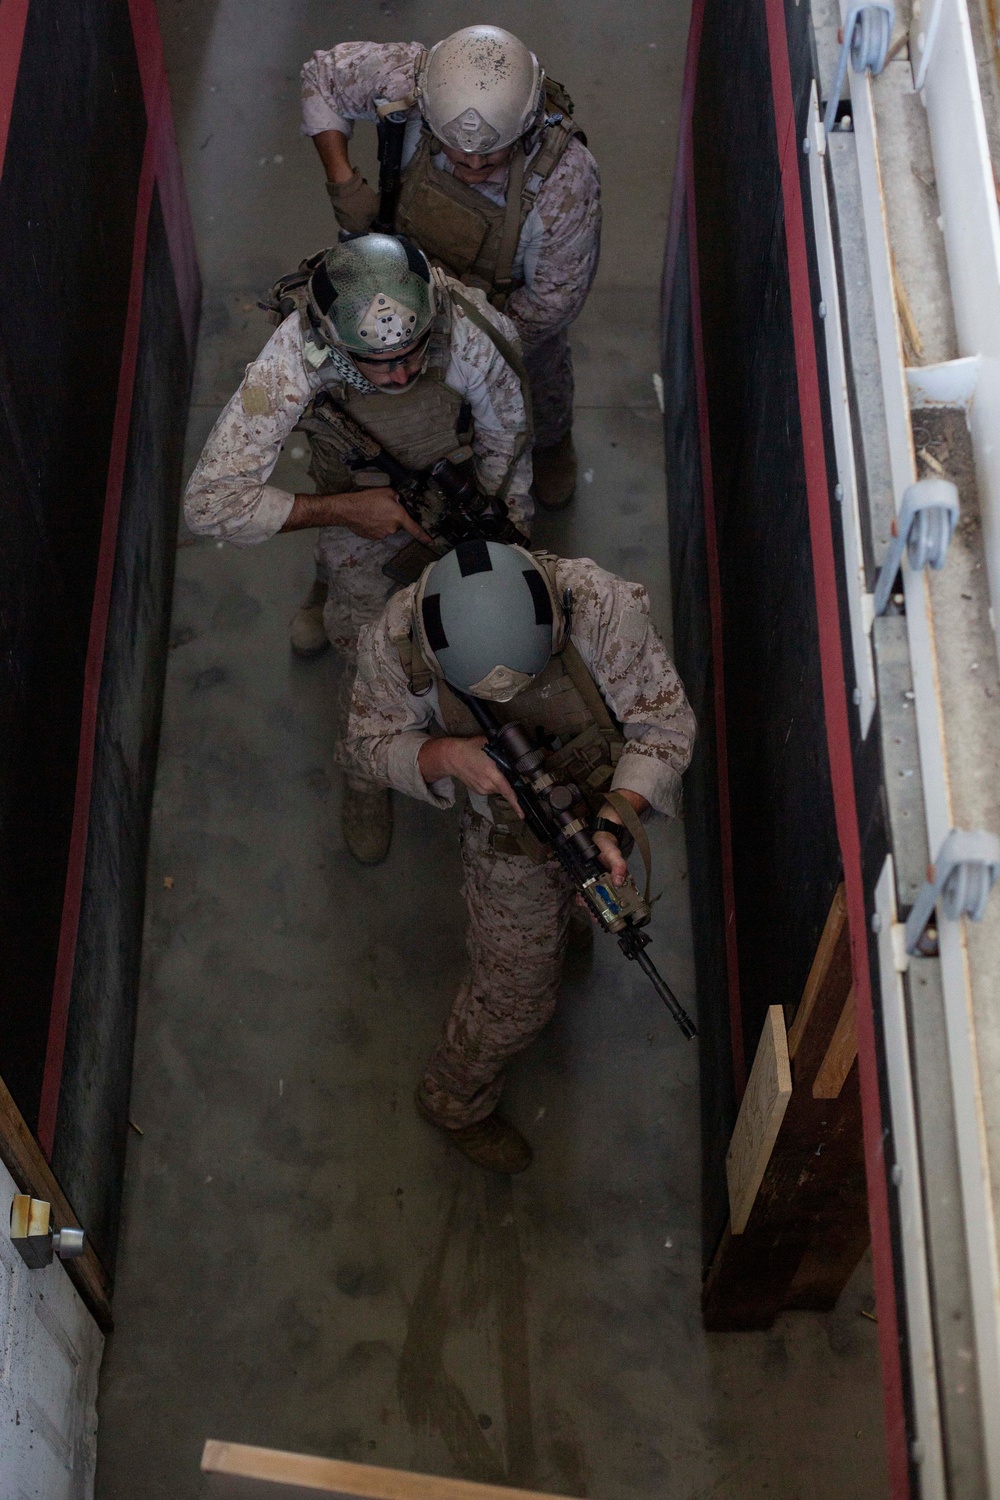 Comin’ in Hot | U.S. Reconnaissance Marines conduct CQT training